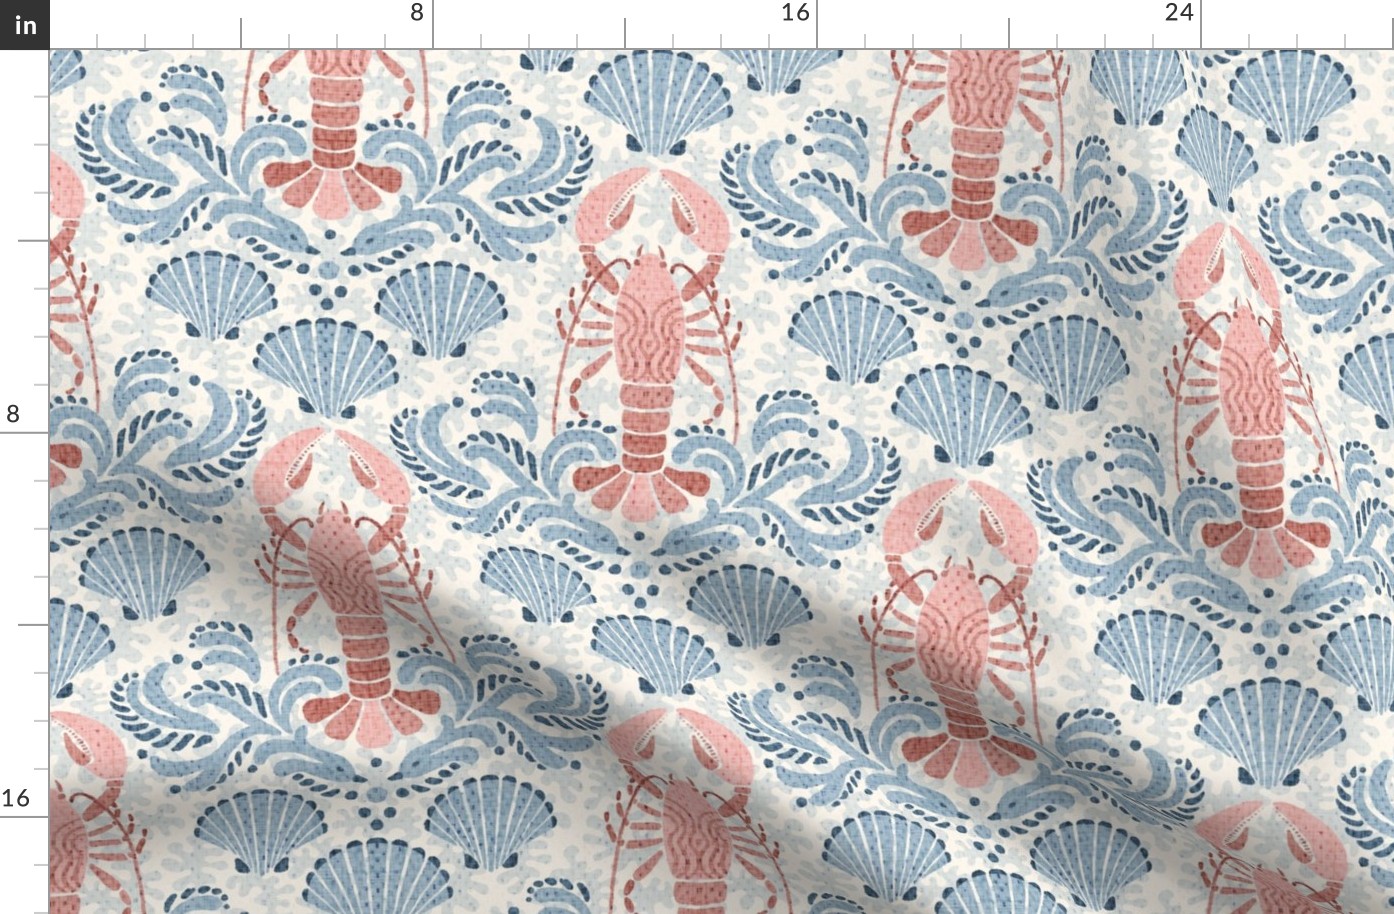 Lobster damask in pale blue and peachy pink - medium scale